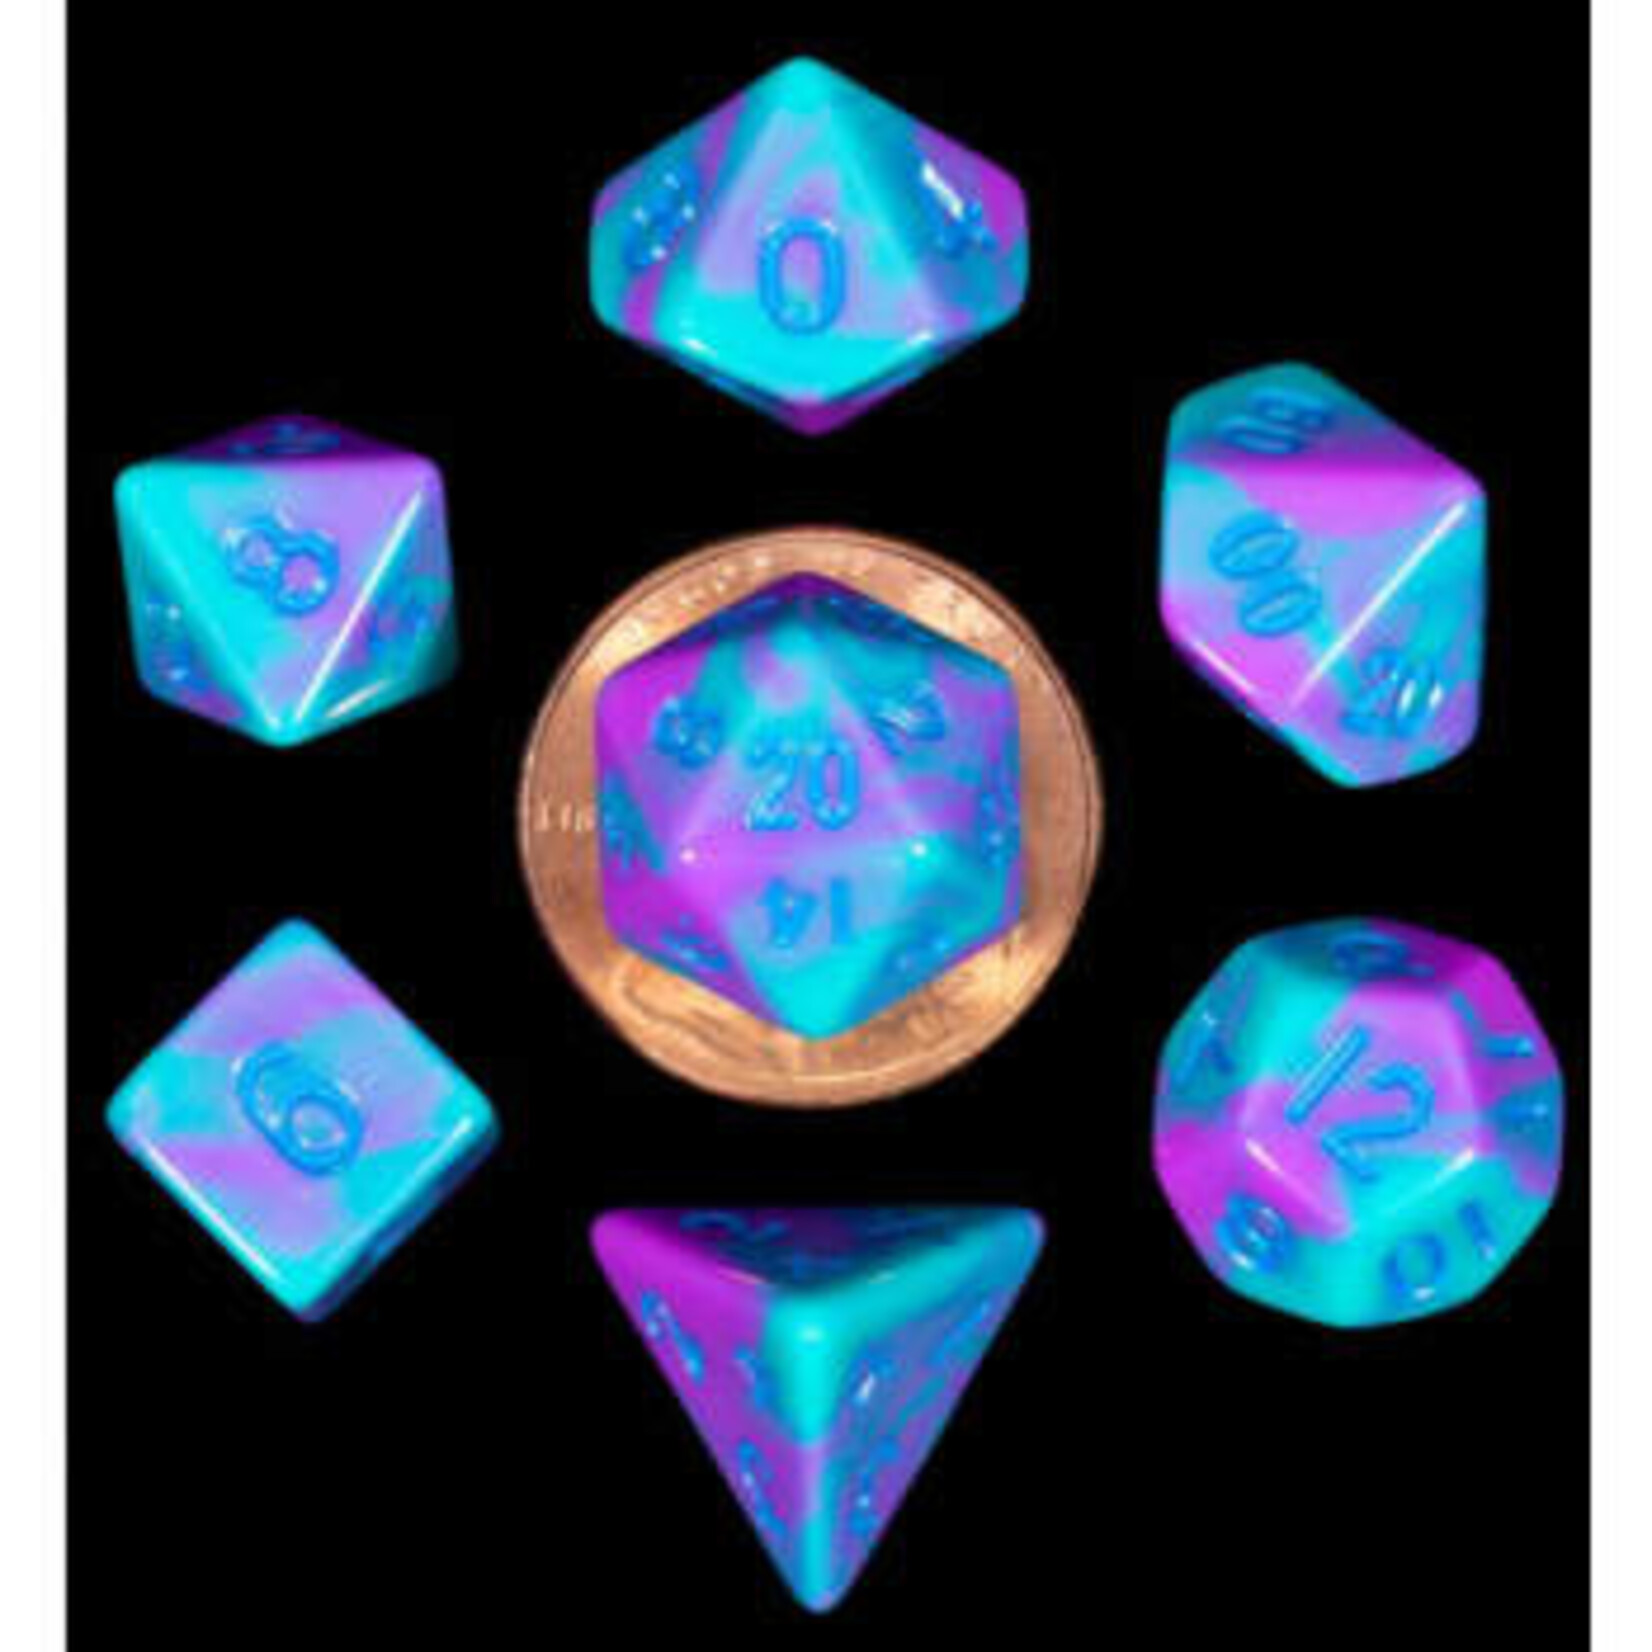 Metallic Dice Games Mini Polyhedral Dice Set: Purple/Teal with Blue Numbers